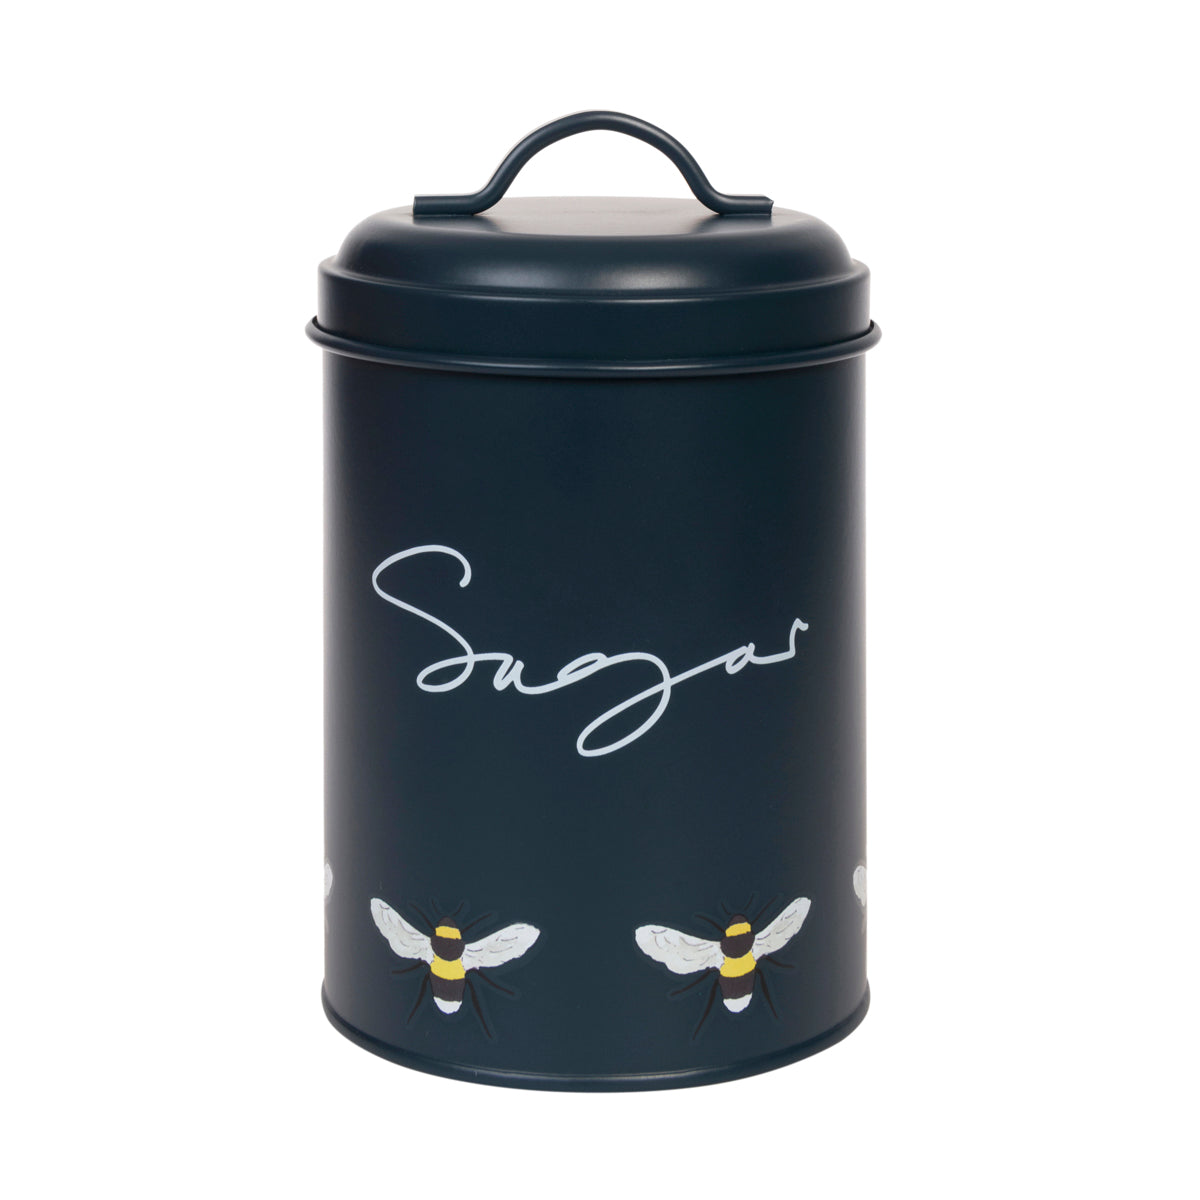 Made from galvanised steel with a navy background, this sugar tin is part of Sophie Allport's Bees Collection. 